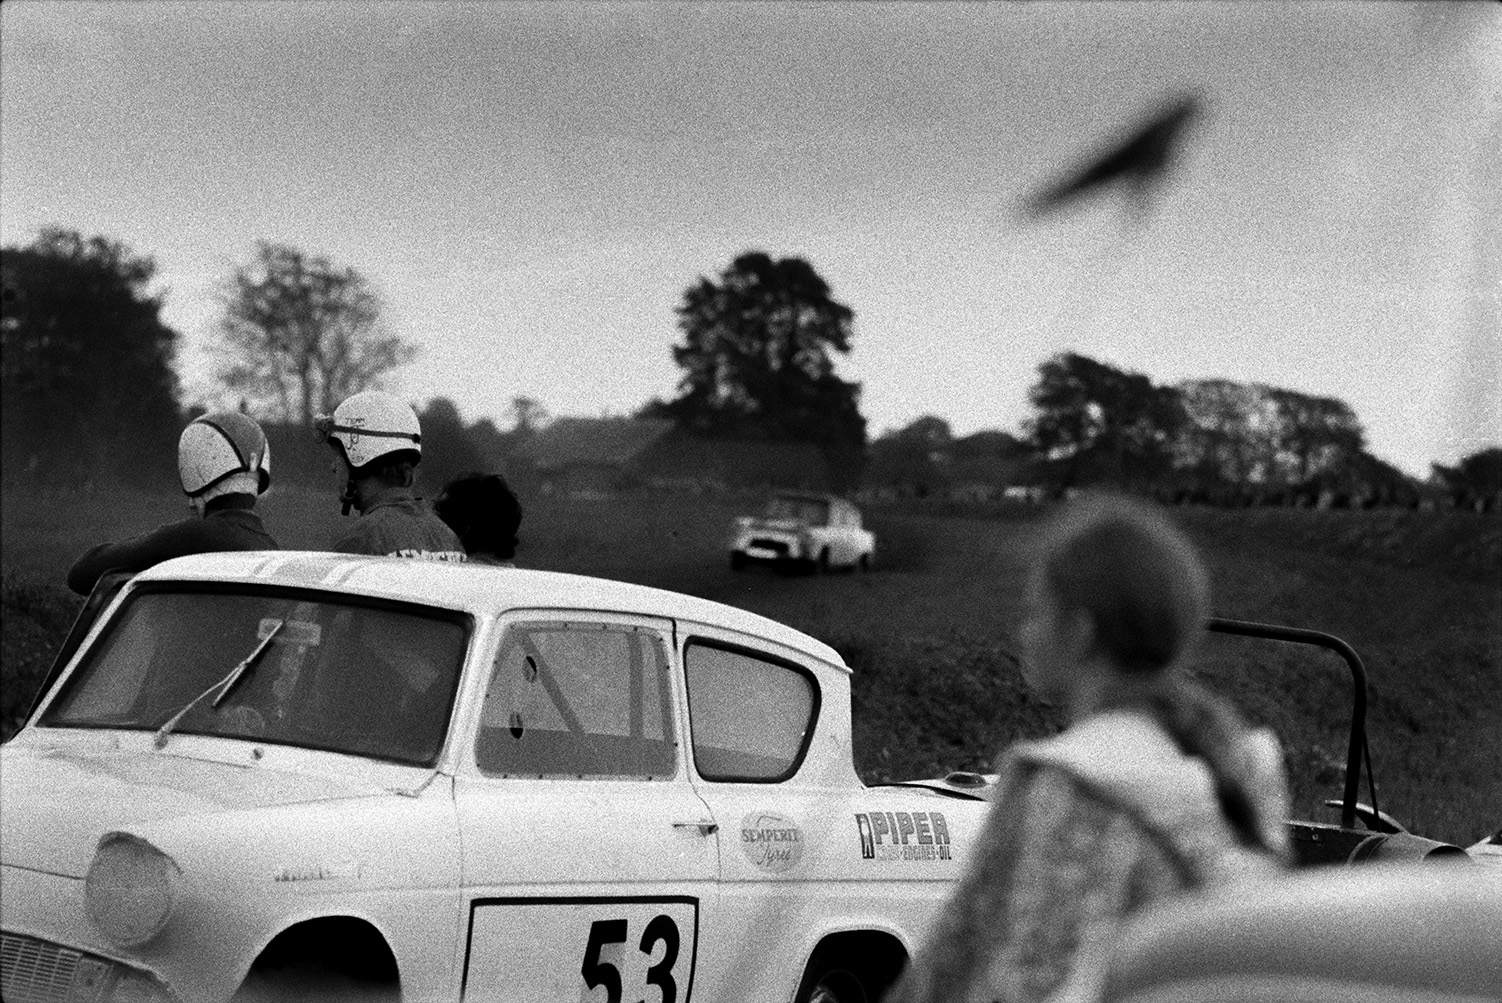 Two competitors stood by a banger car before racing it at Sugworthy. Another car can be seen racing in the background and a girl is watching in the foreground.